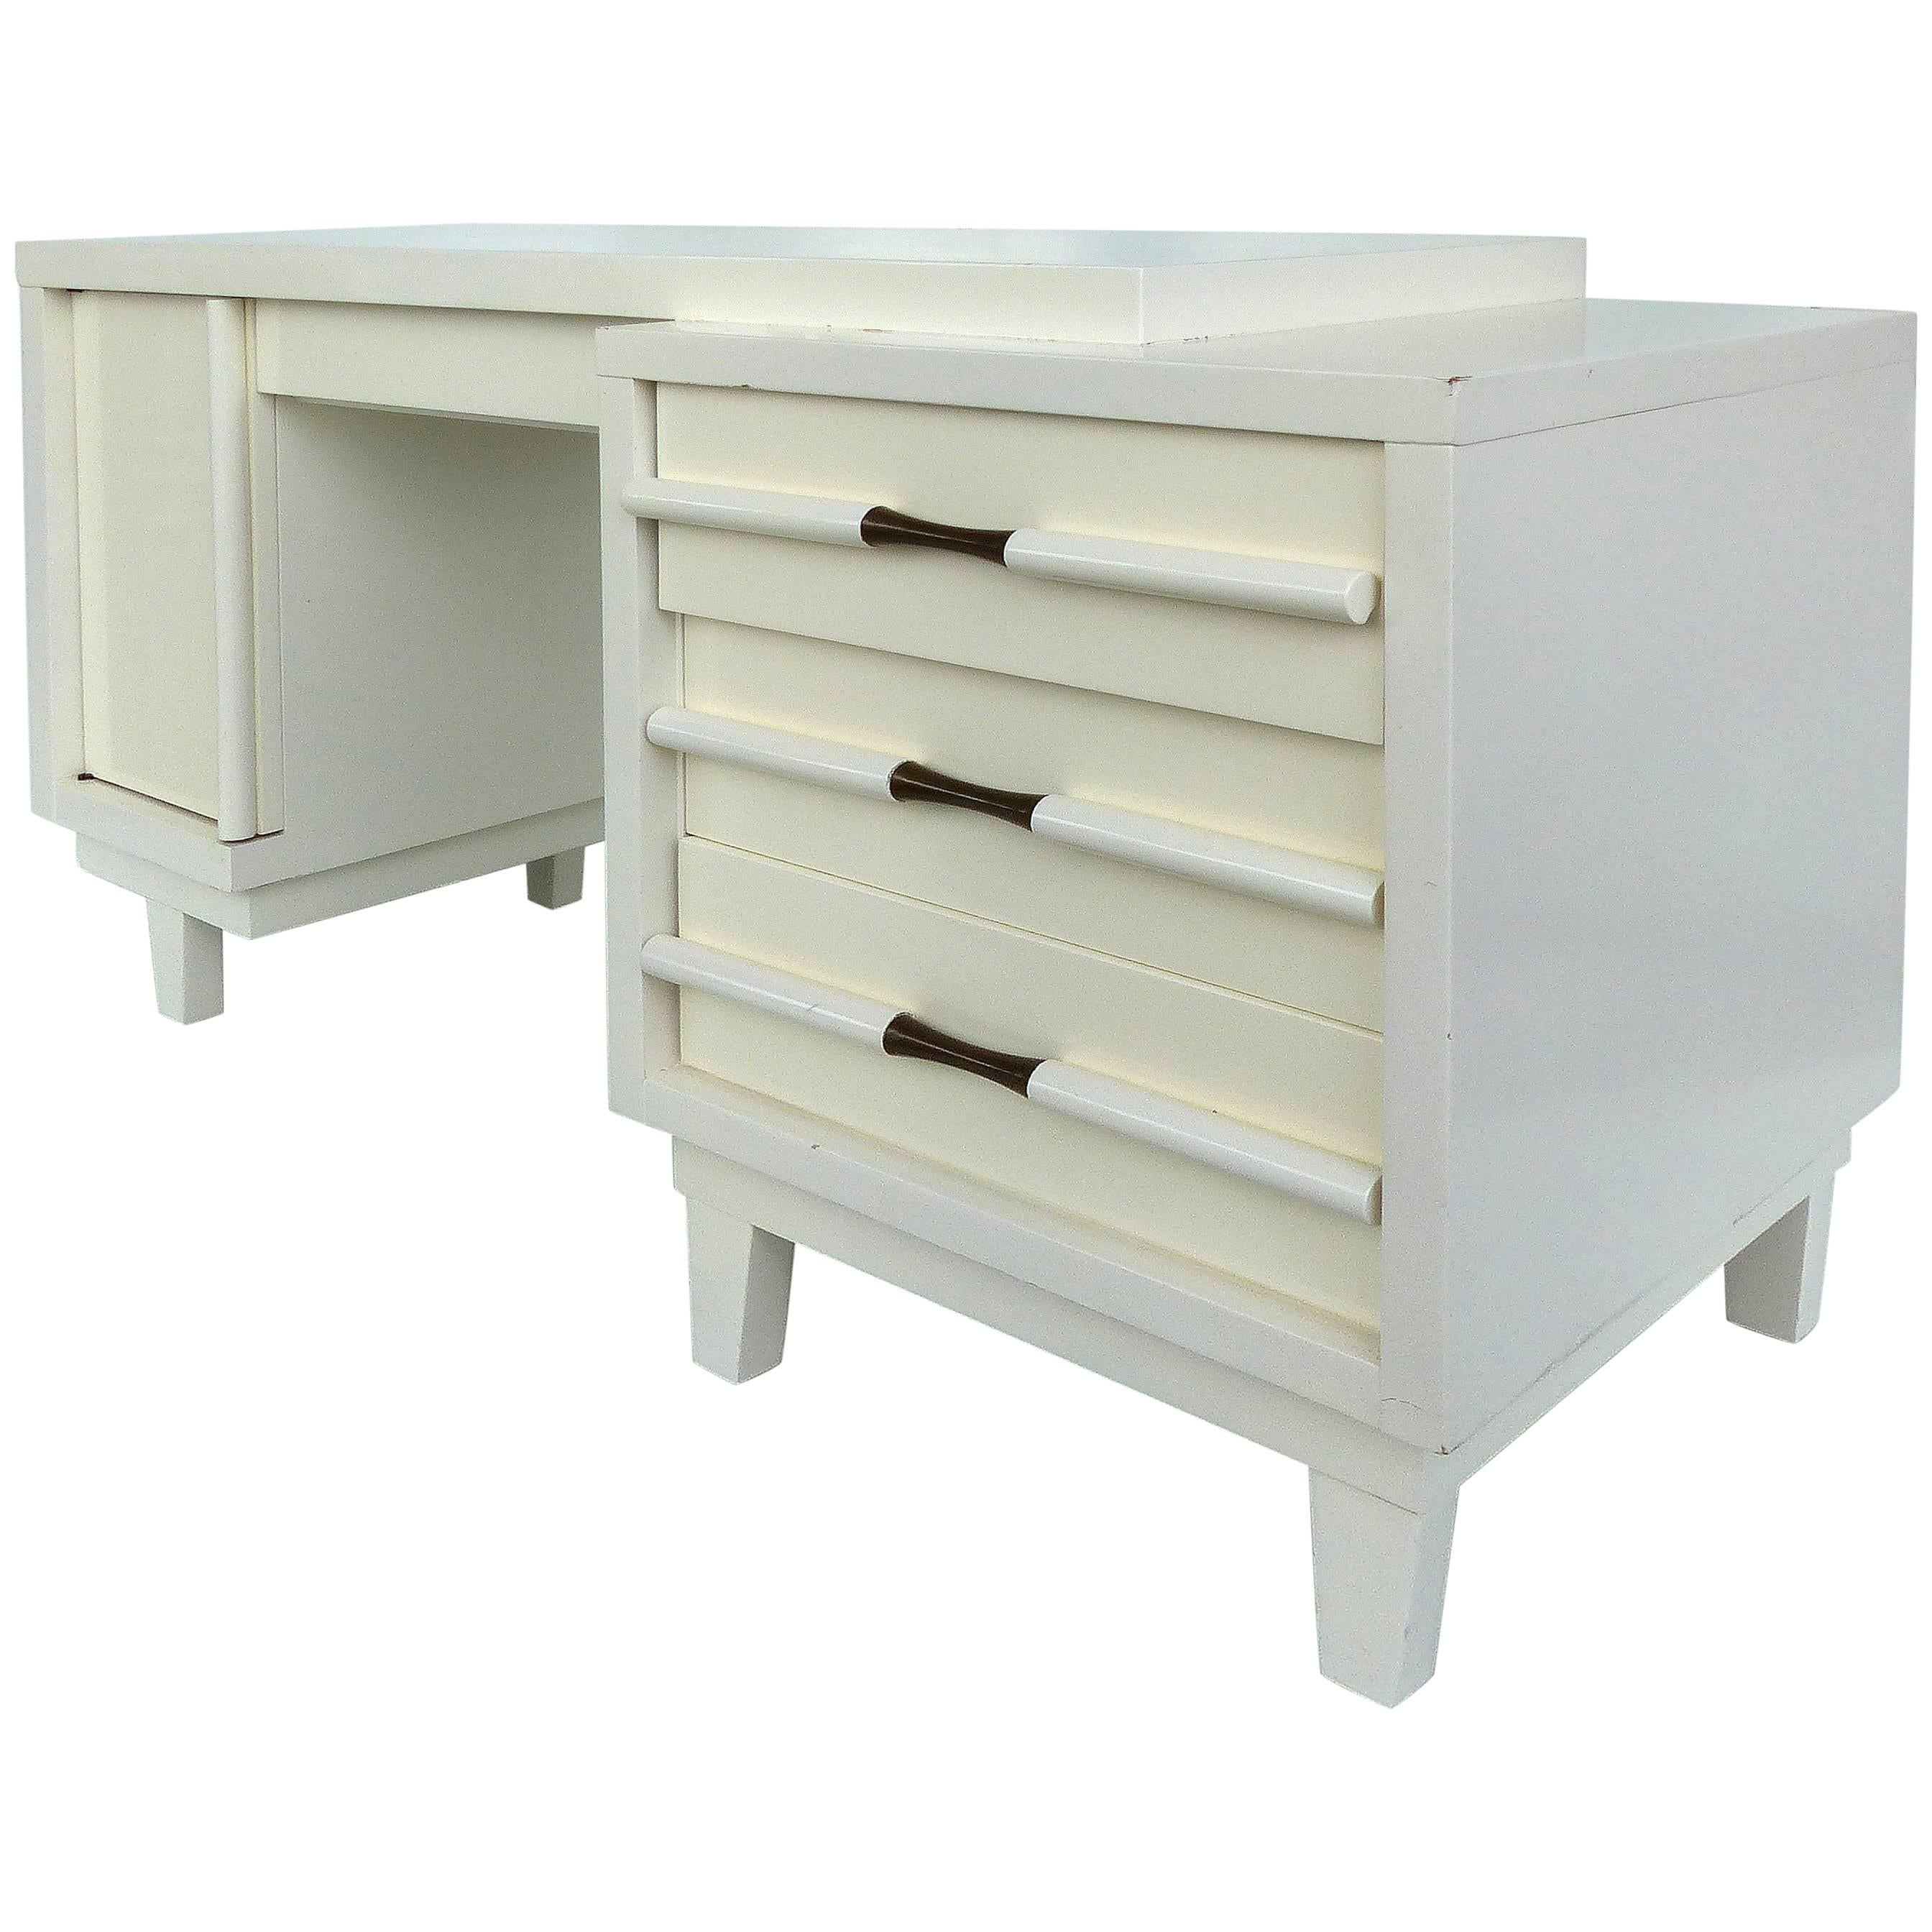 Mid-Century Modern Ivory Lacquered Desk from a South Beach Estate